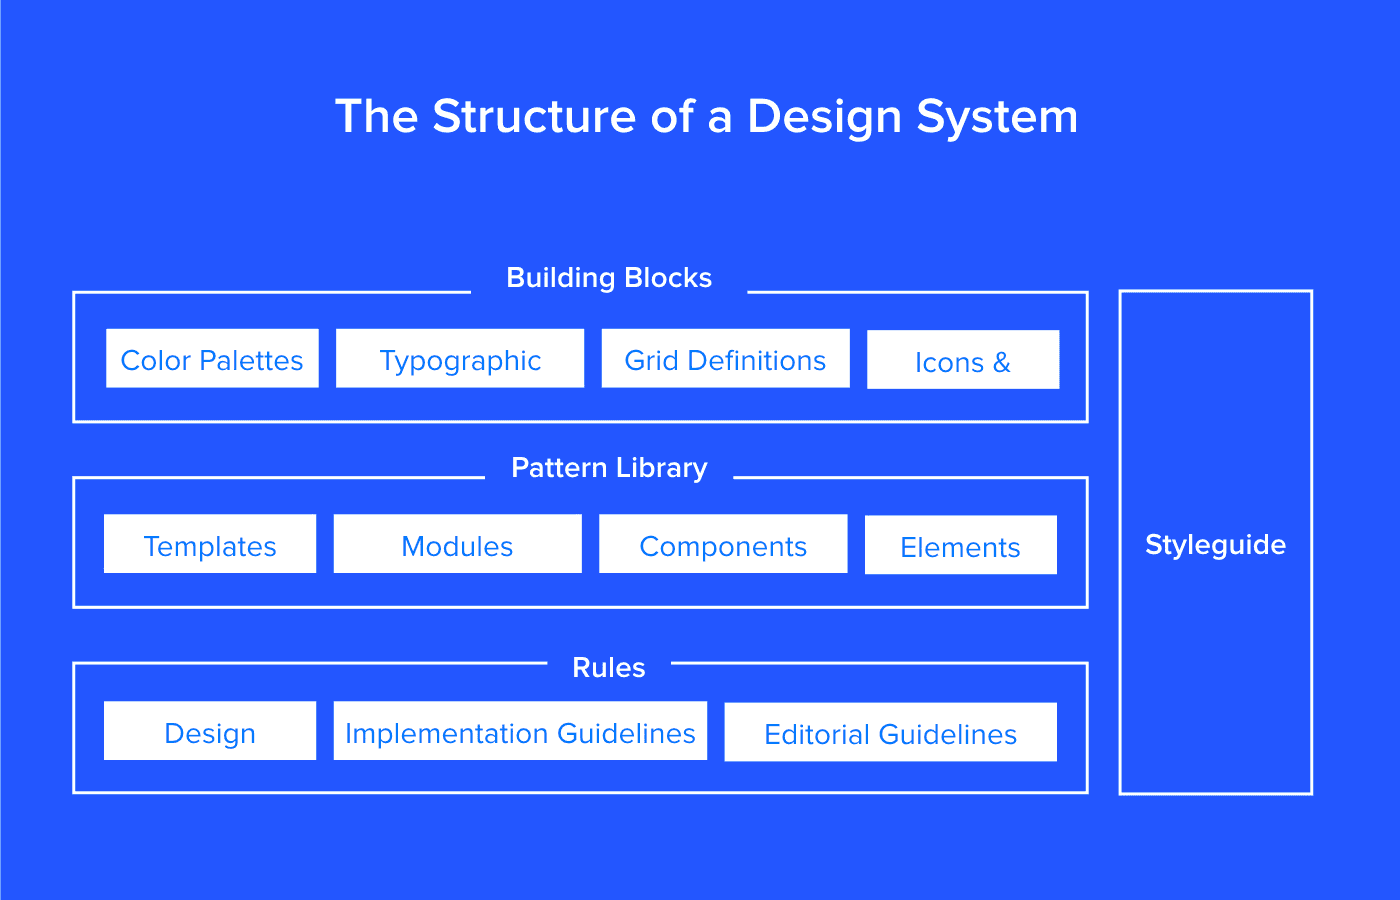 Figure 1. Rutherford (2017) “The structure of a Design System”